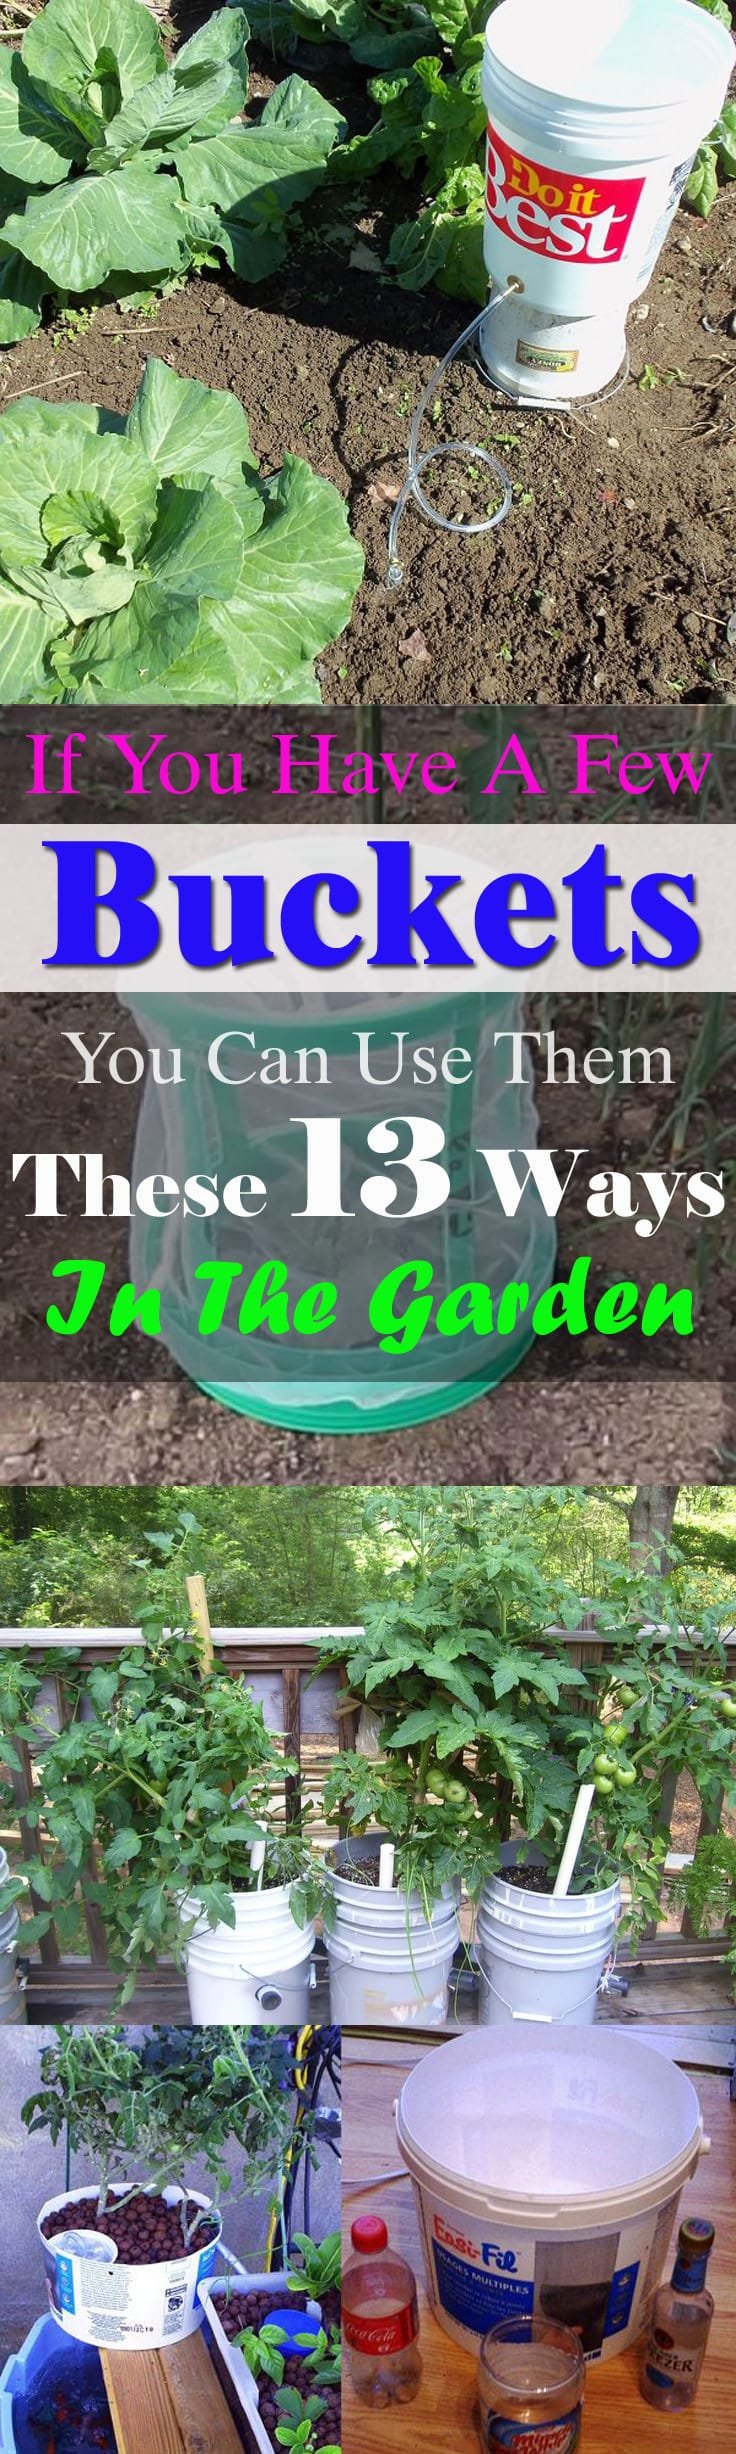 If you've got a few unused buckets in your home, there are 13 ways to reuse them in your garden!